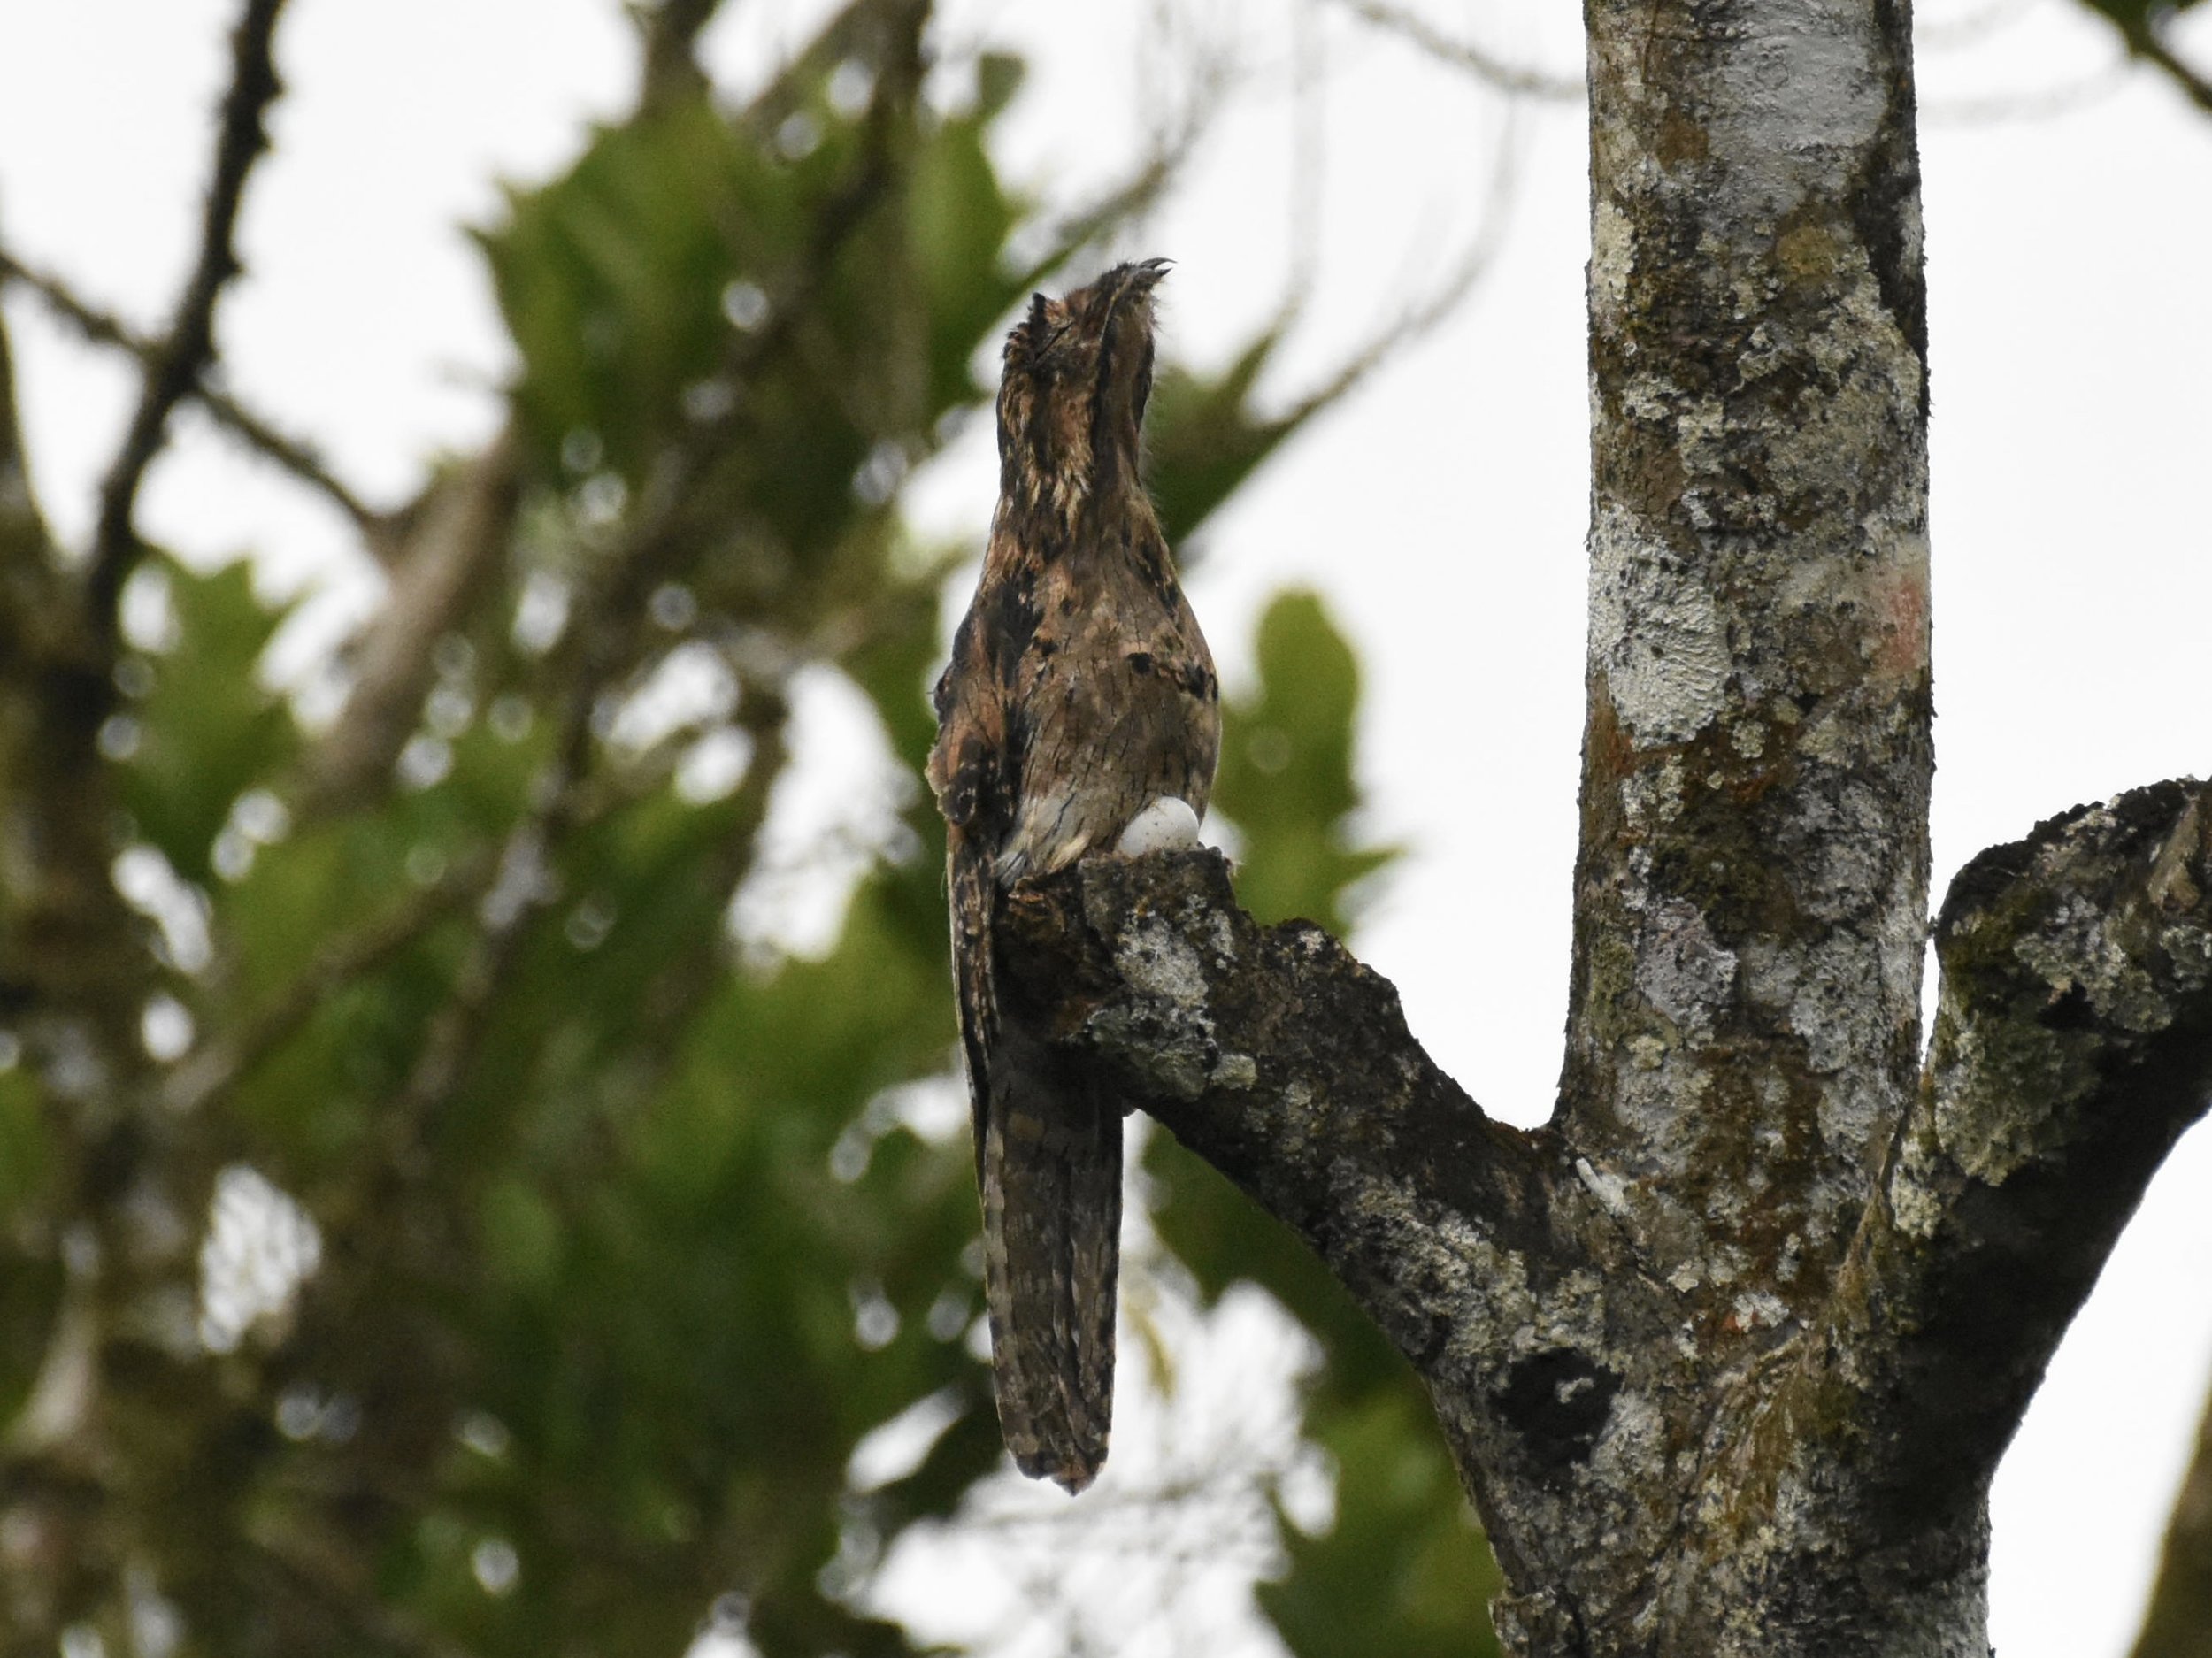 Common Potoo with egg